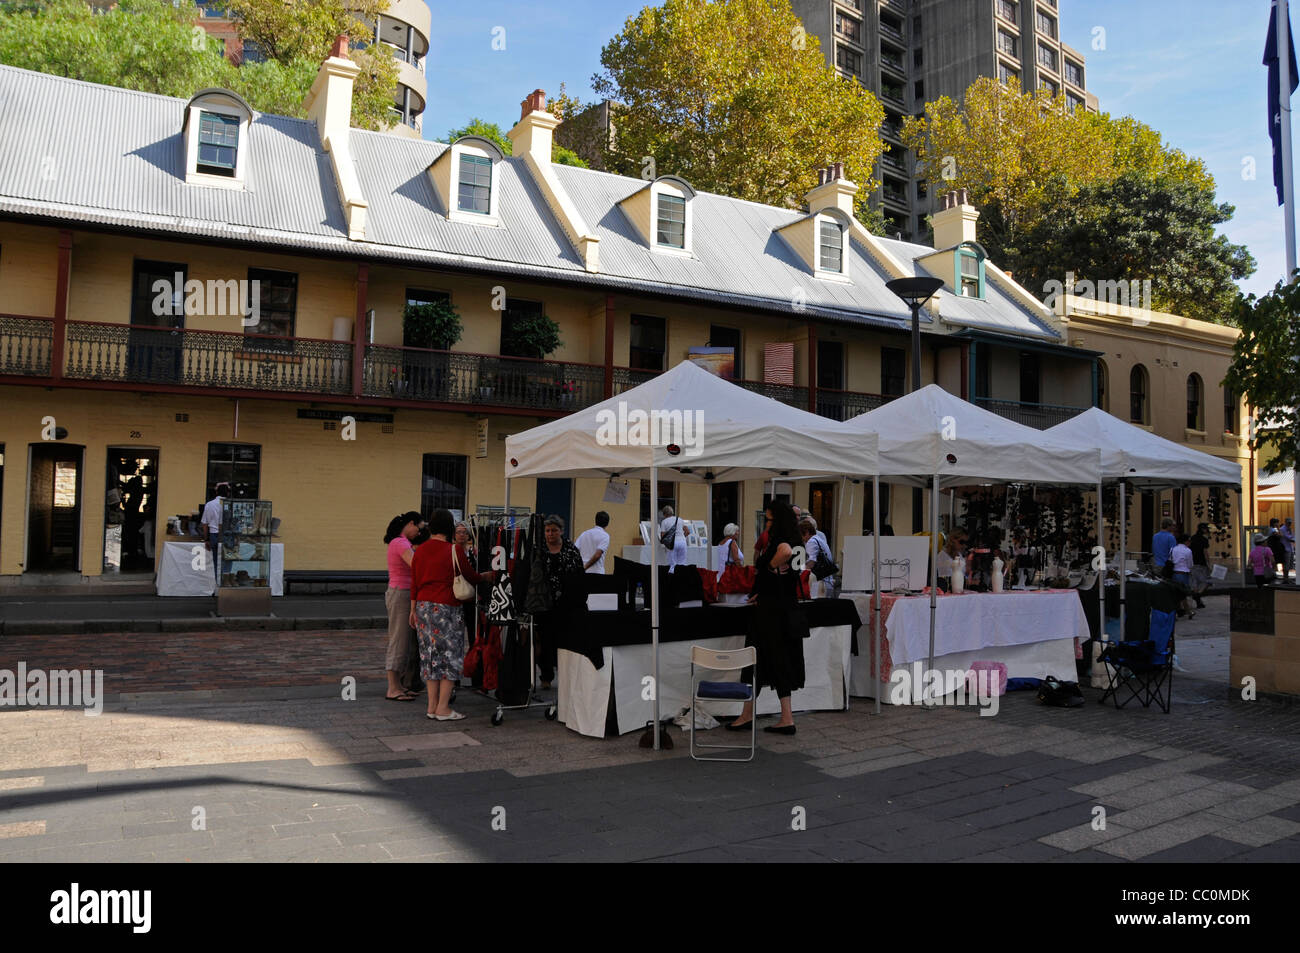 A market stall in a side street in The Rocks, a historical suburb of Sydney in New South Wales, Australia Stock Photo